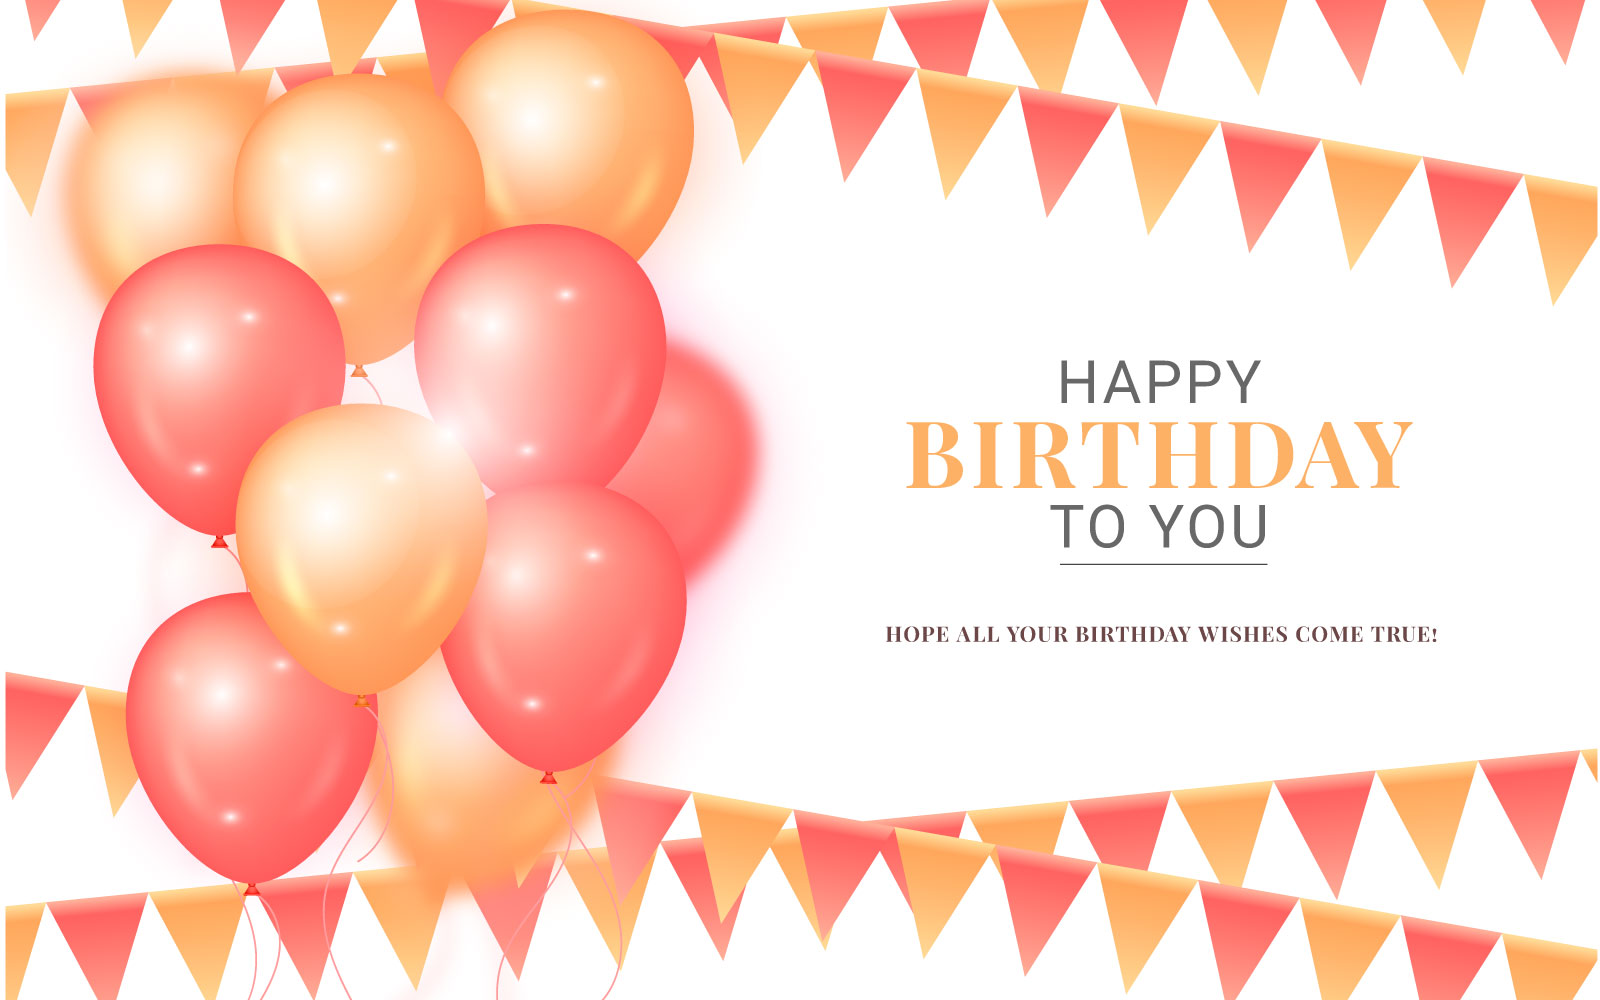 Happy birthday congratulations banner design with  balloons   for party holidays